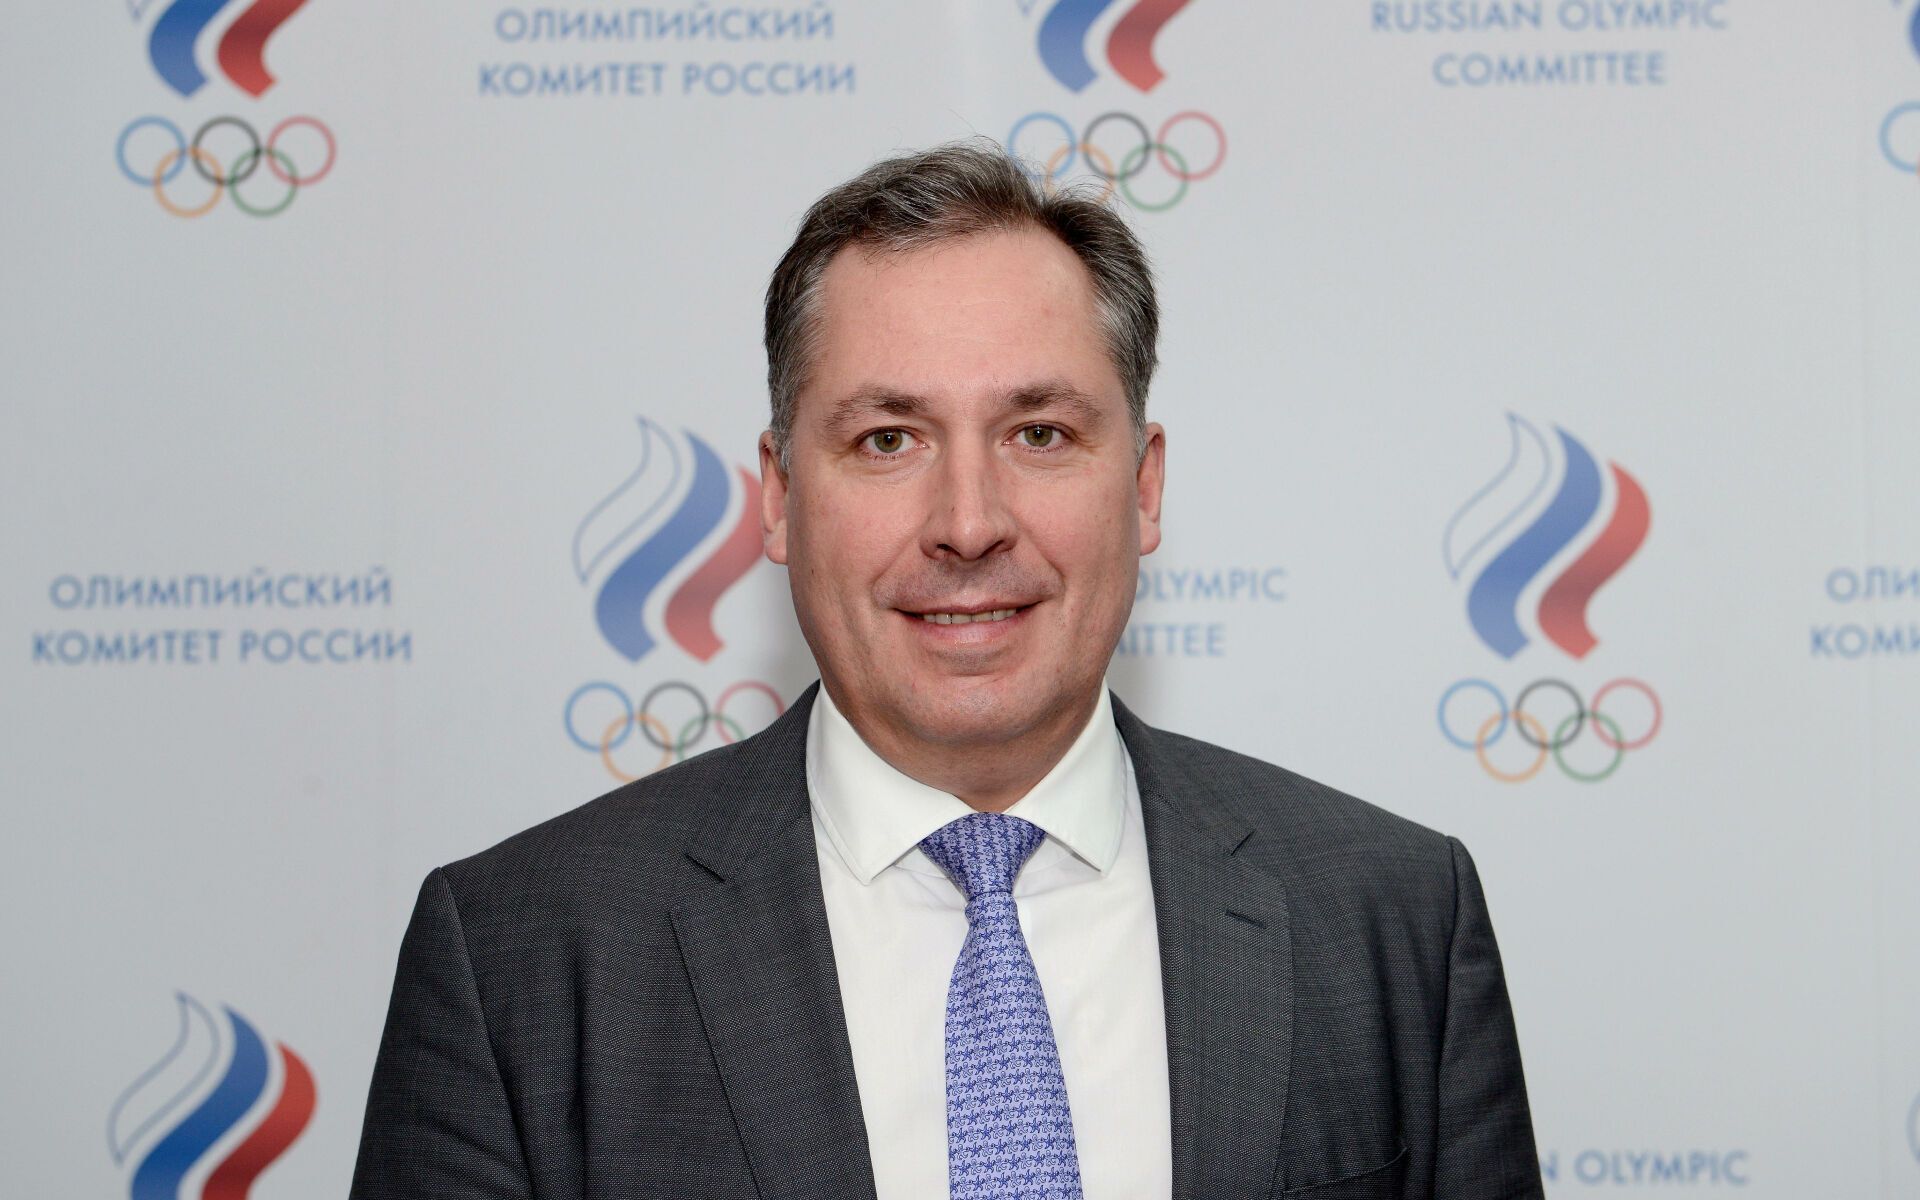 Russia demands that the IOC ''correct its own mistake made in February''